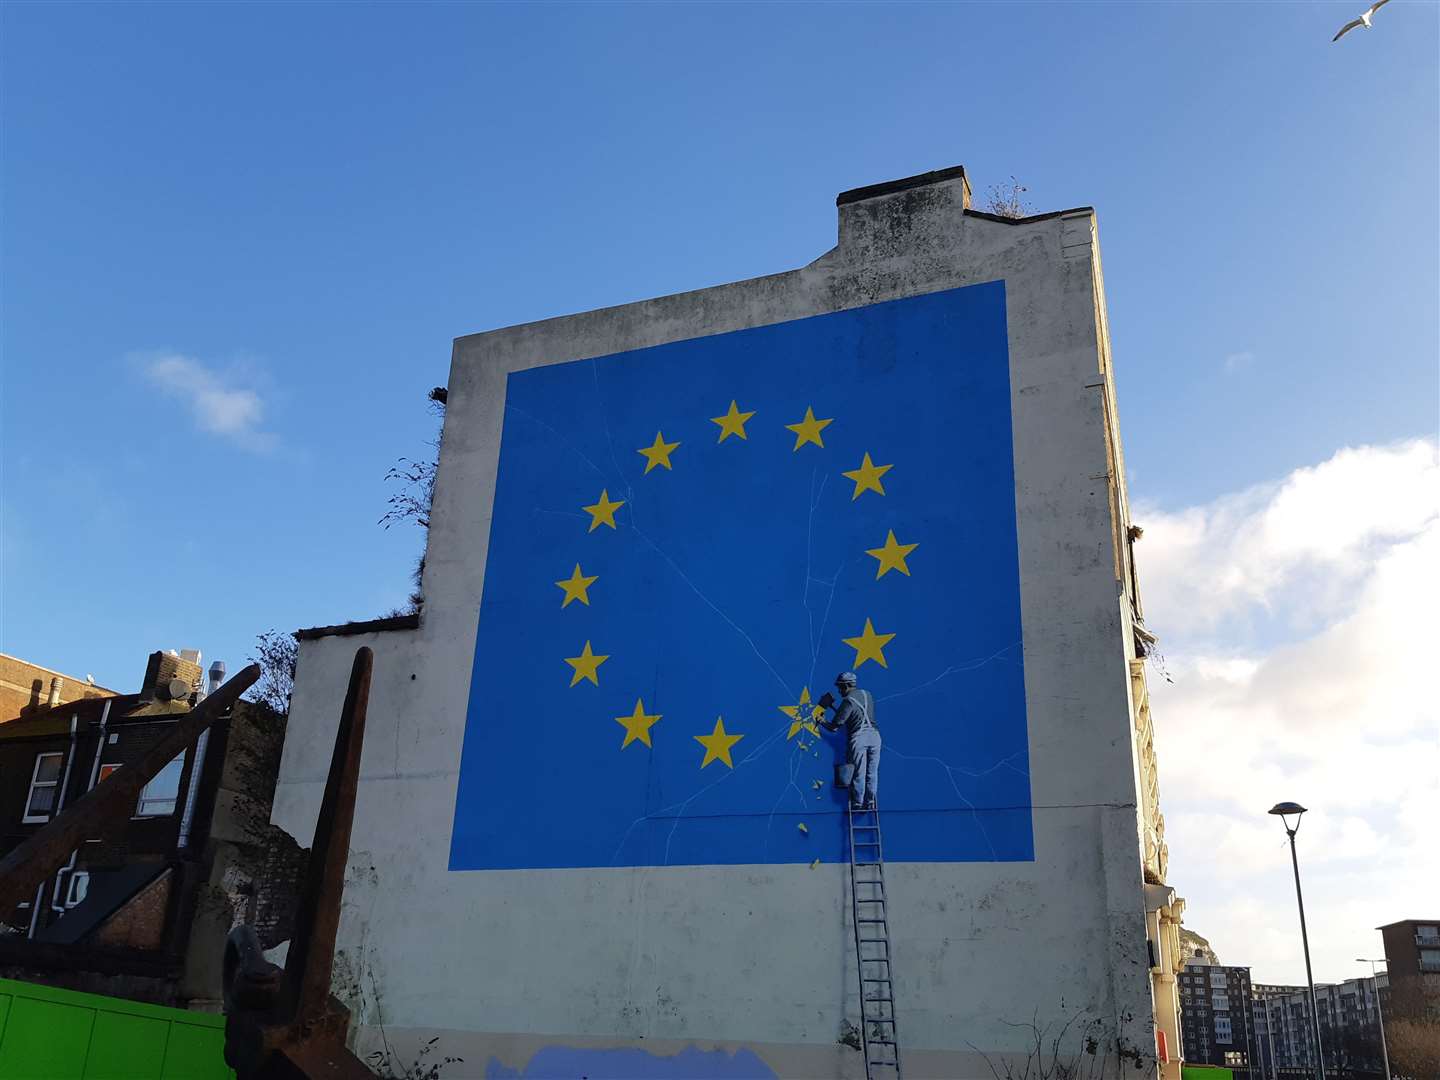 The Banksy Brexit mural - which was later removed